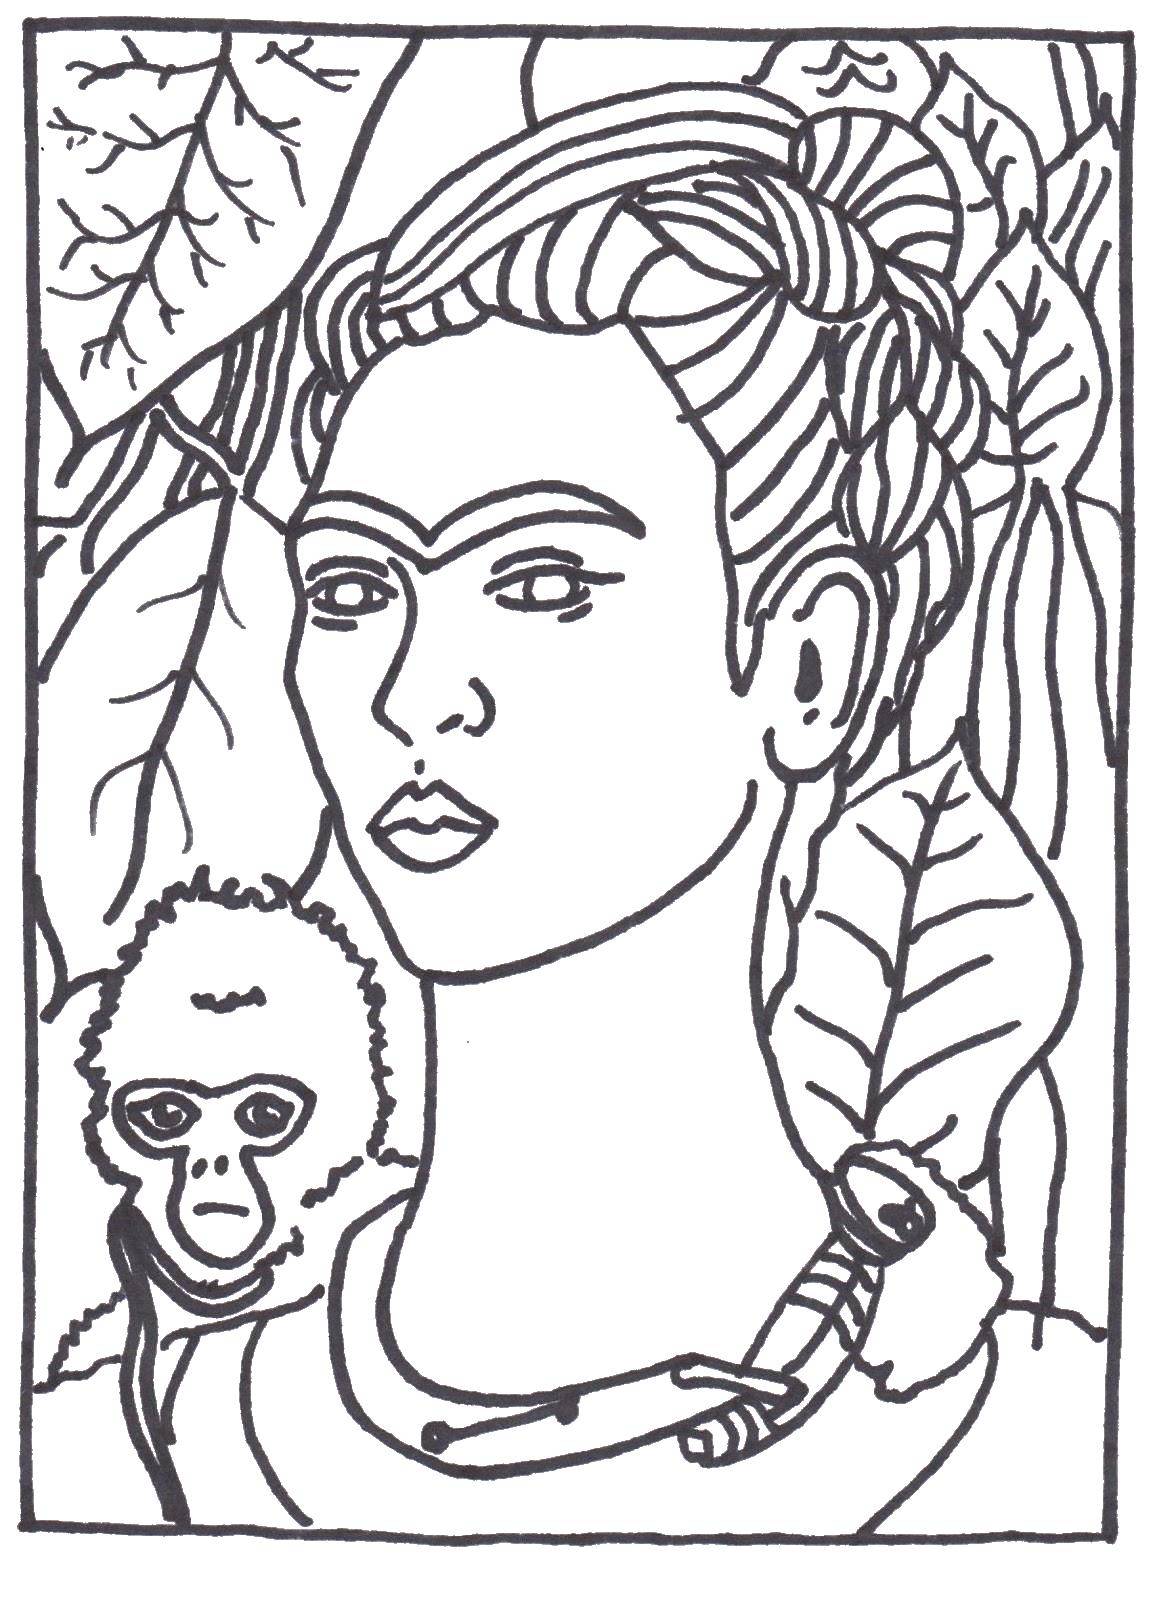 Coloring Frida. Category coloring. Tags:  Celebrity.